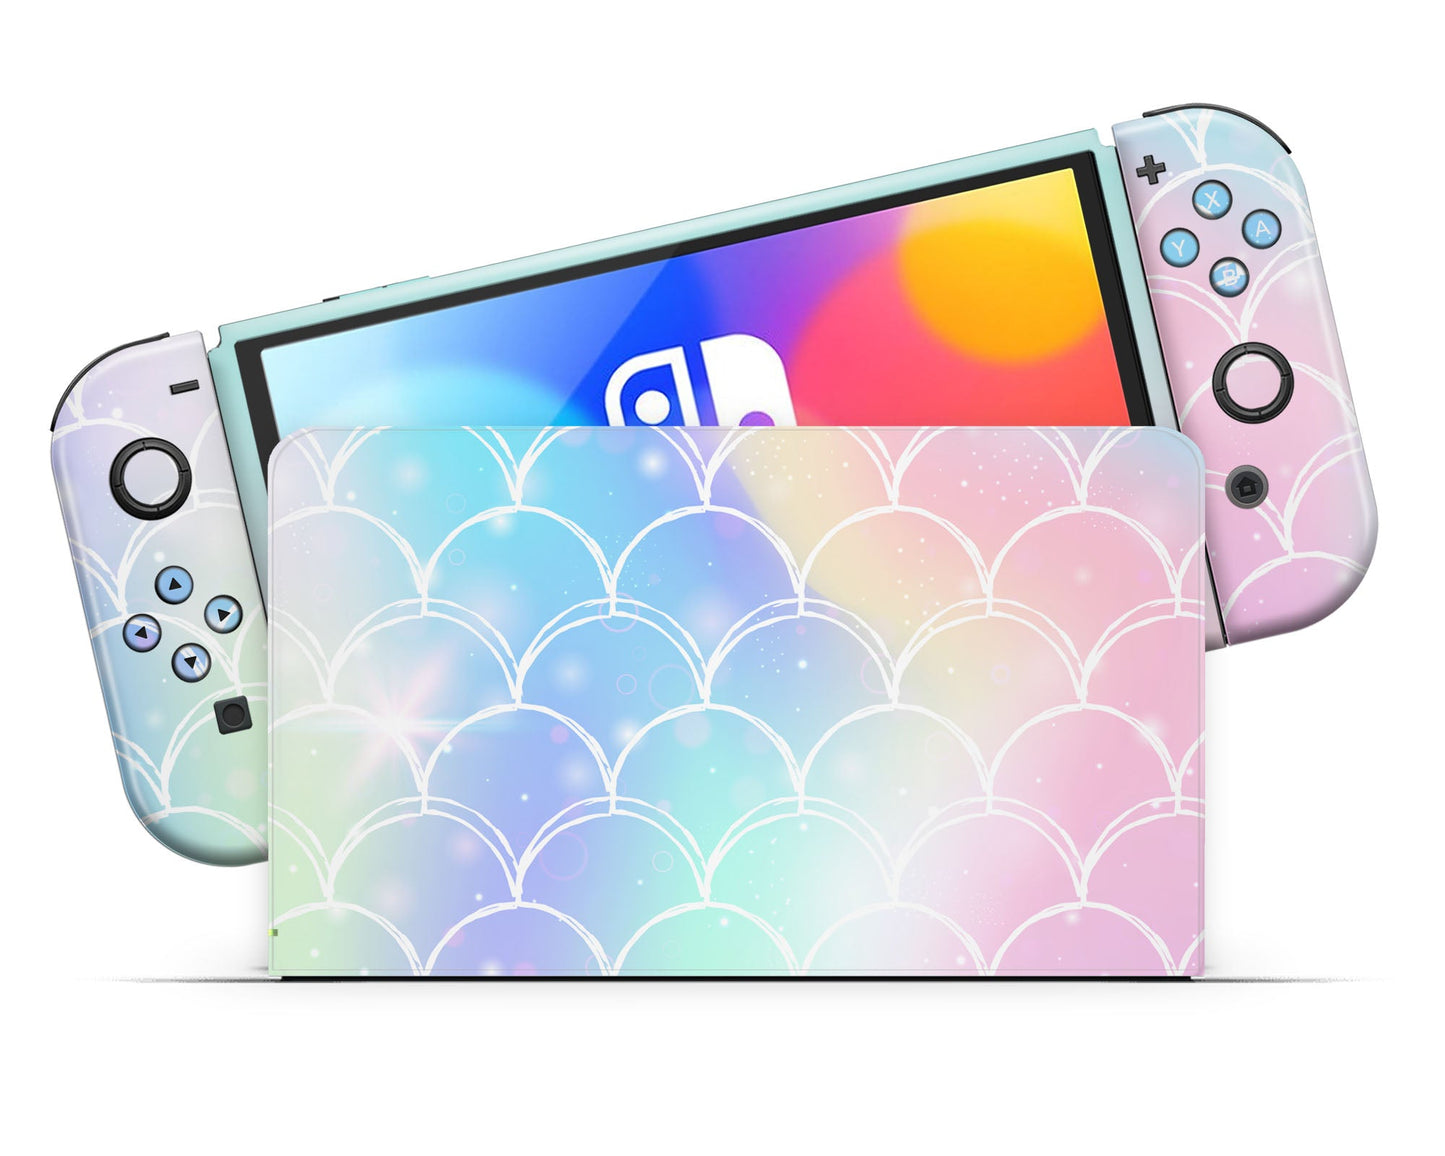 Lux Skins Nintendo Switch OLED Iridescent Pastel Mermaid Classic no logo Skins - Pattern Abstract Skin